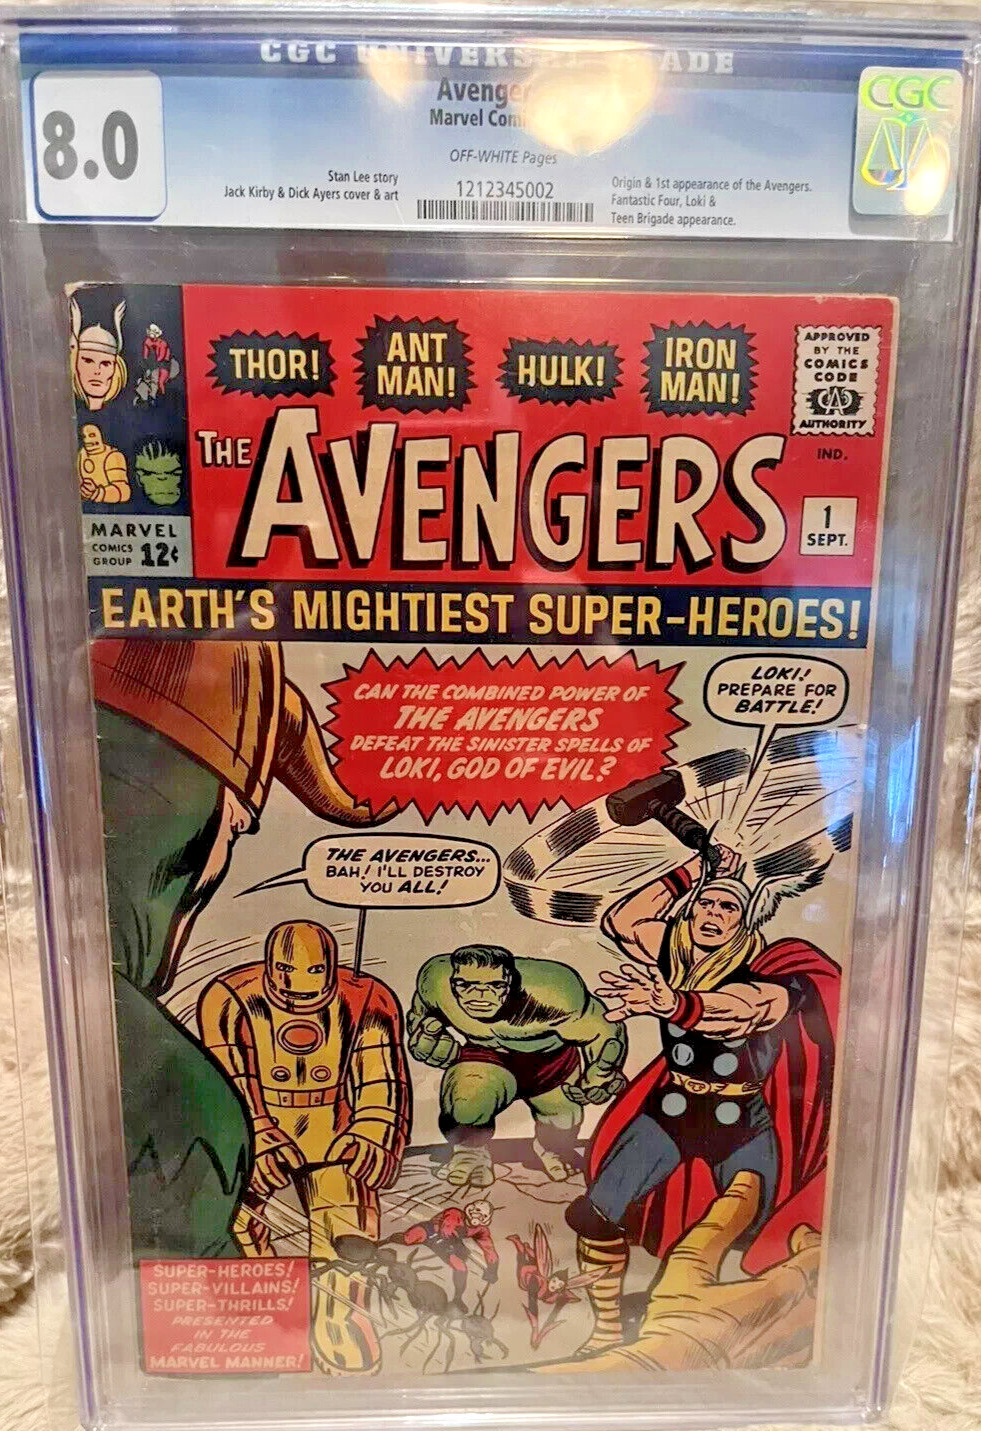 Marvel's Avengers #1 1963 CGC 8.0 Off White Pages Origin And 1st Appearance